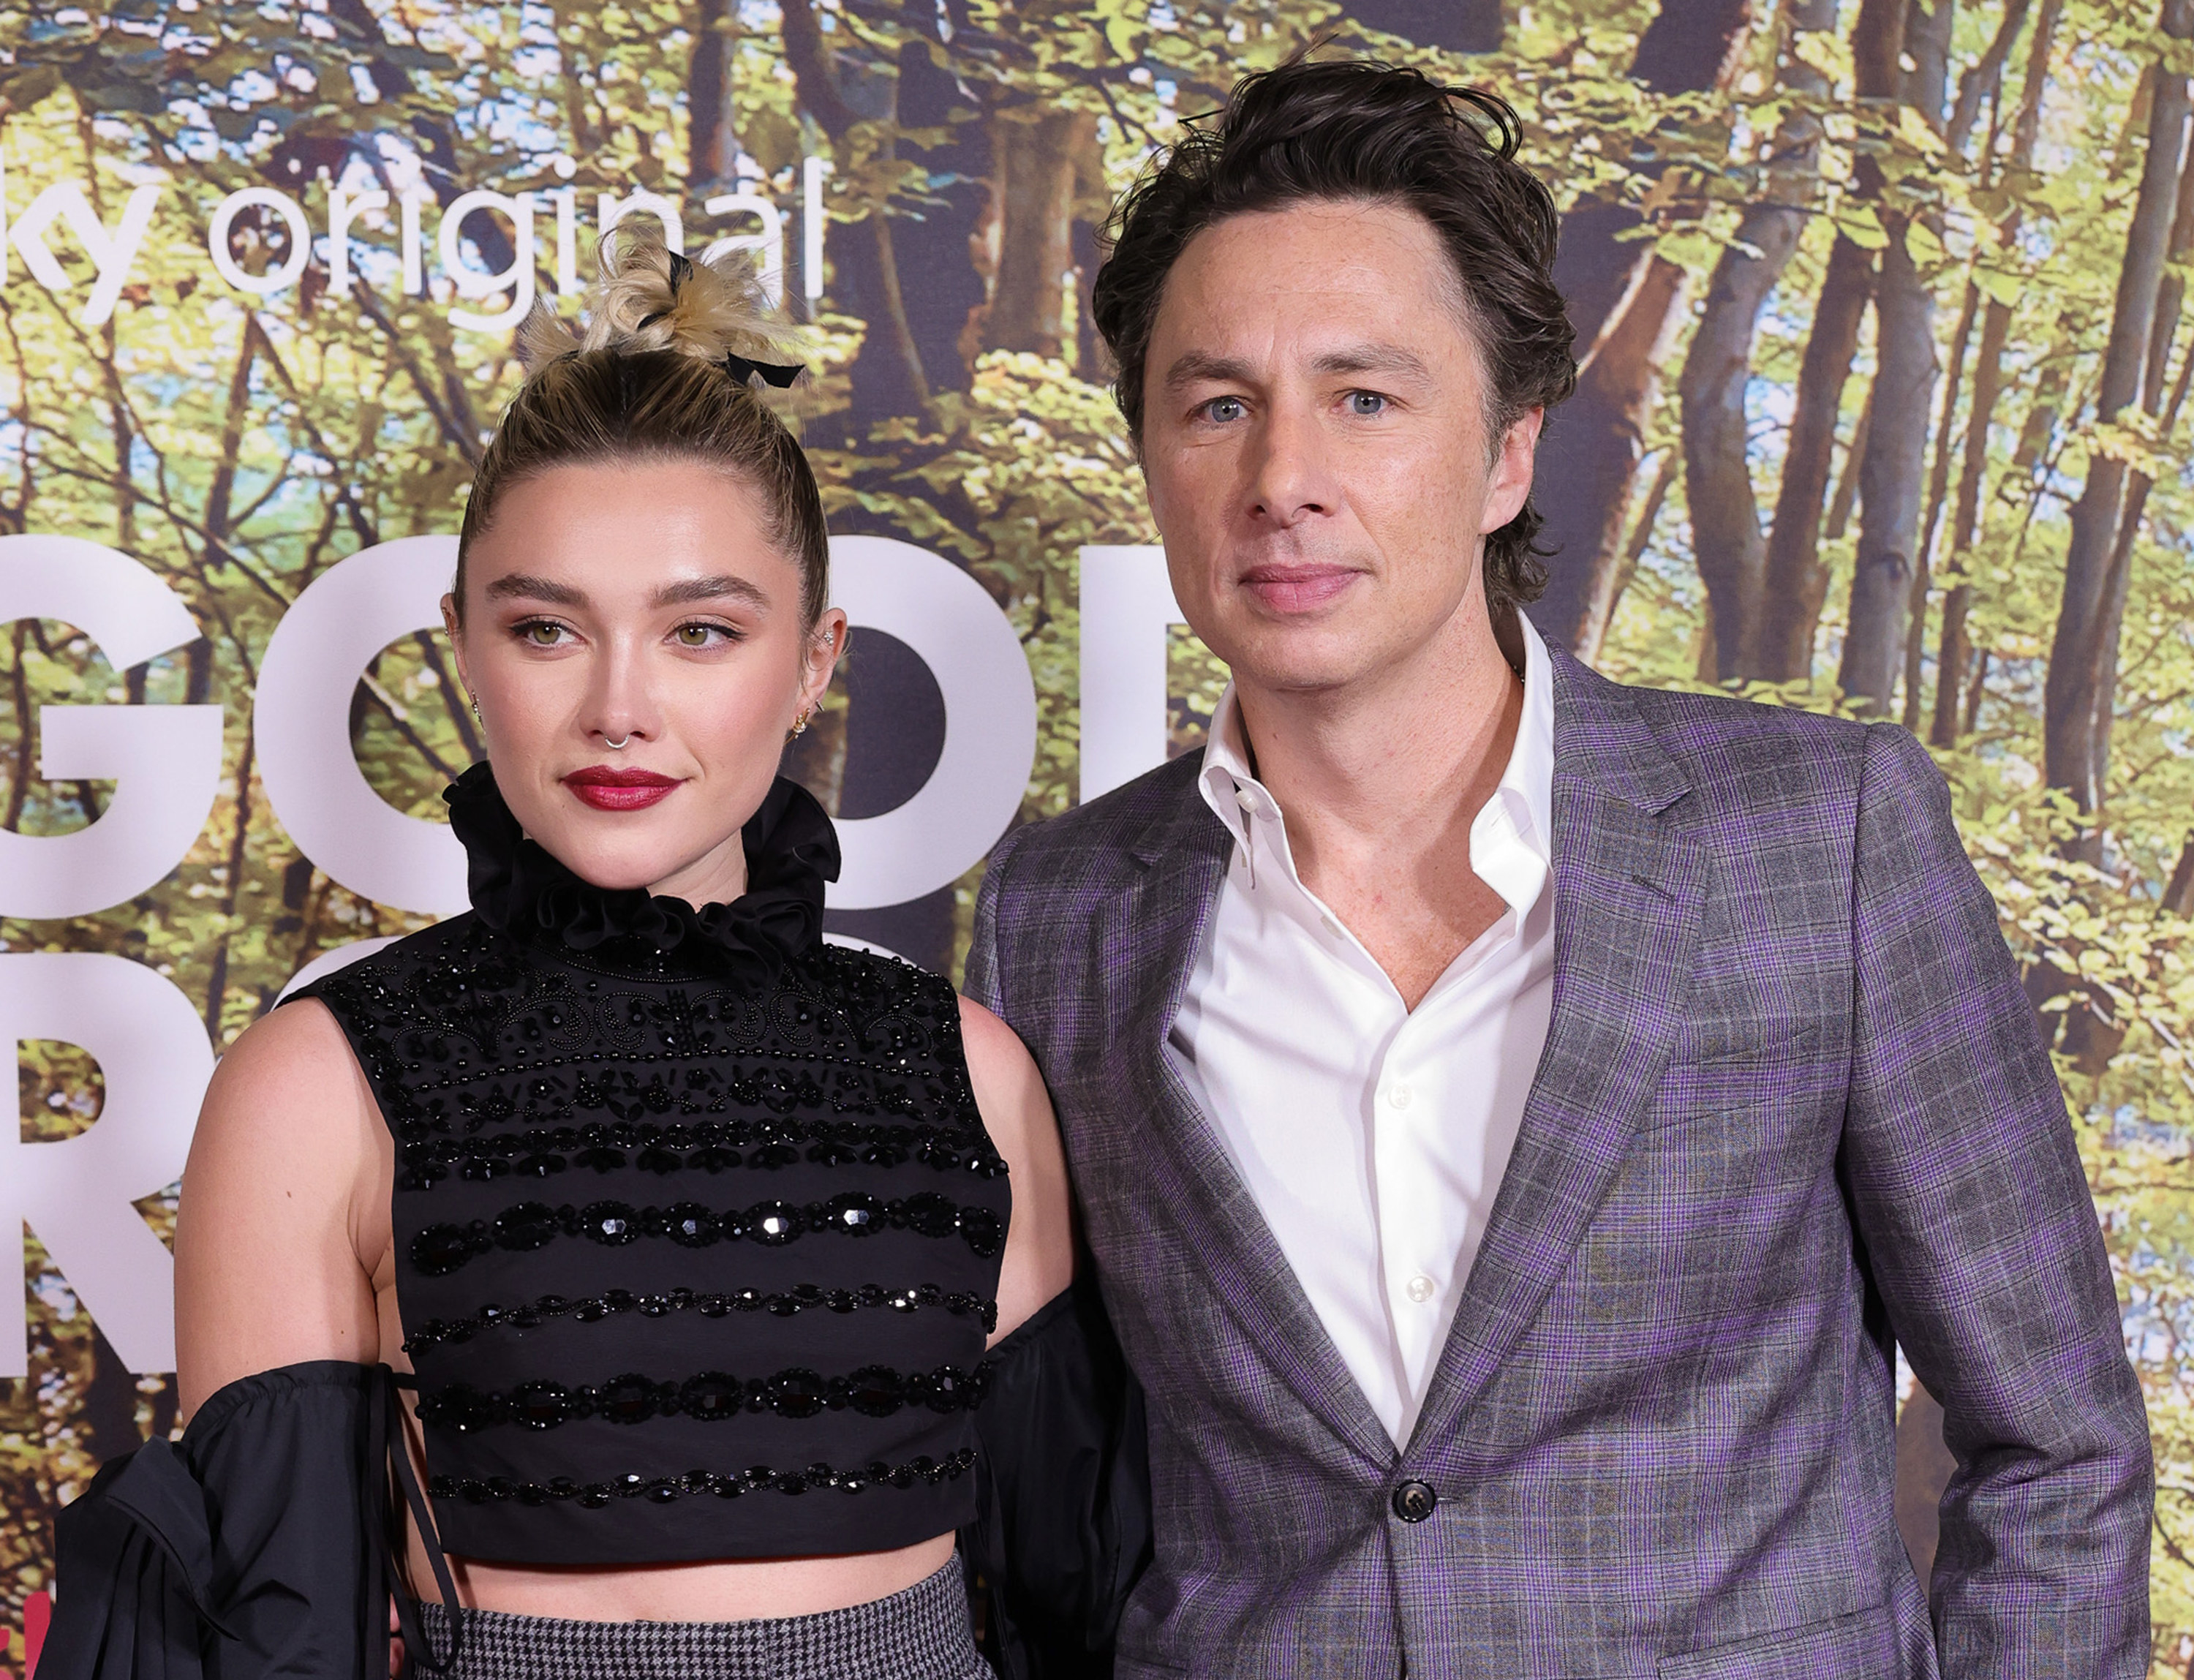 Zach Braff and Florence Pugh posing together on the red carpet, she&#x27;s wearing a black crop top and high-waisted pants, he&#x27;s in a purple plaid suit